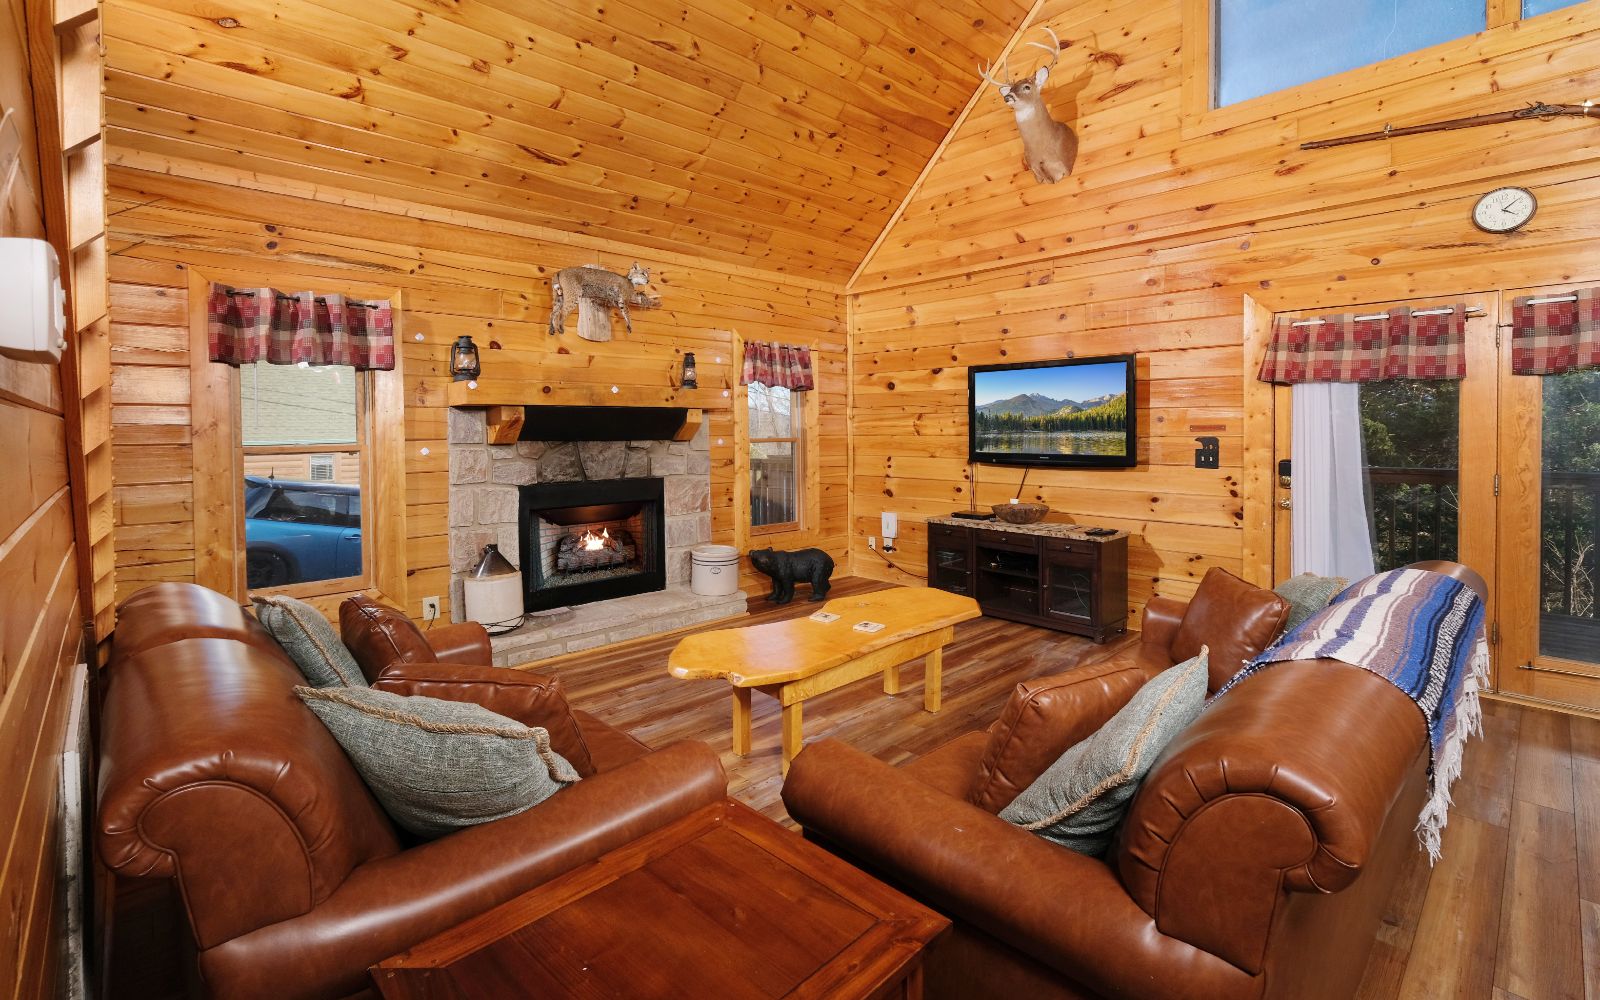 9 Winter Lodges That Are Both Cozy and Majestic - Samantha Brown